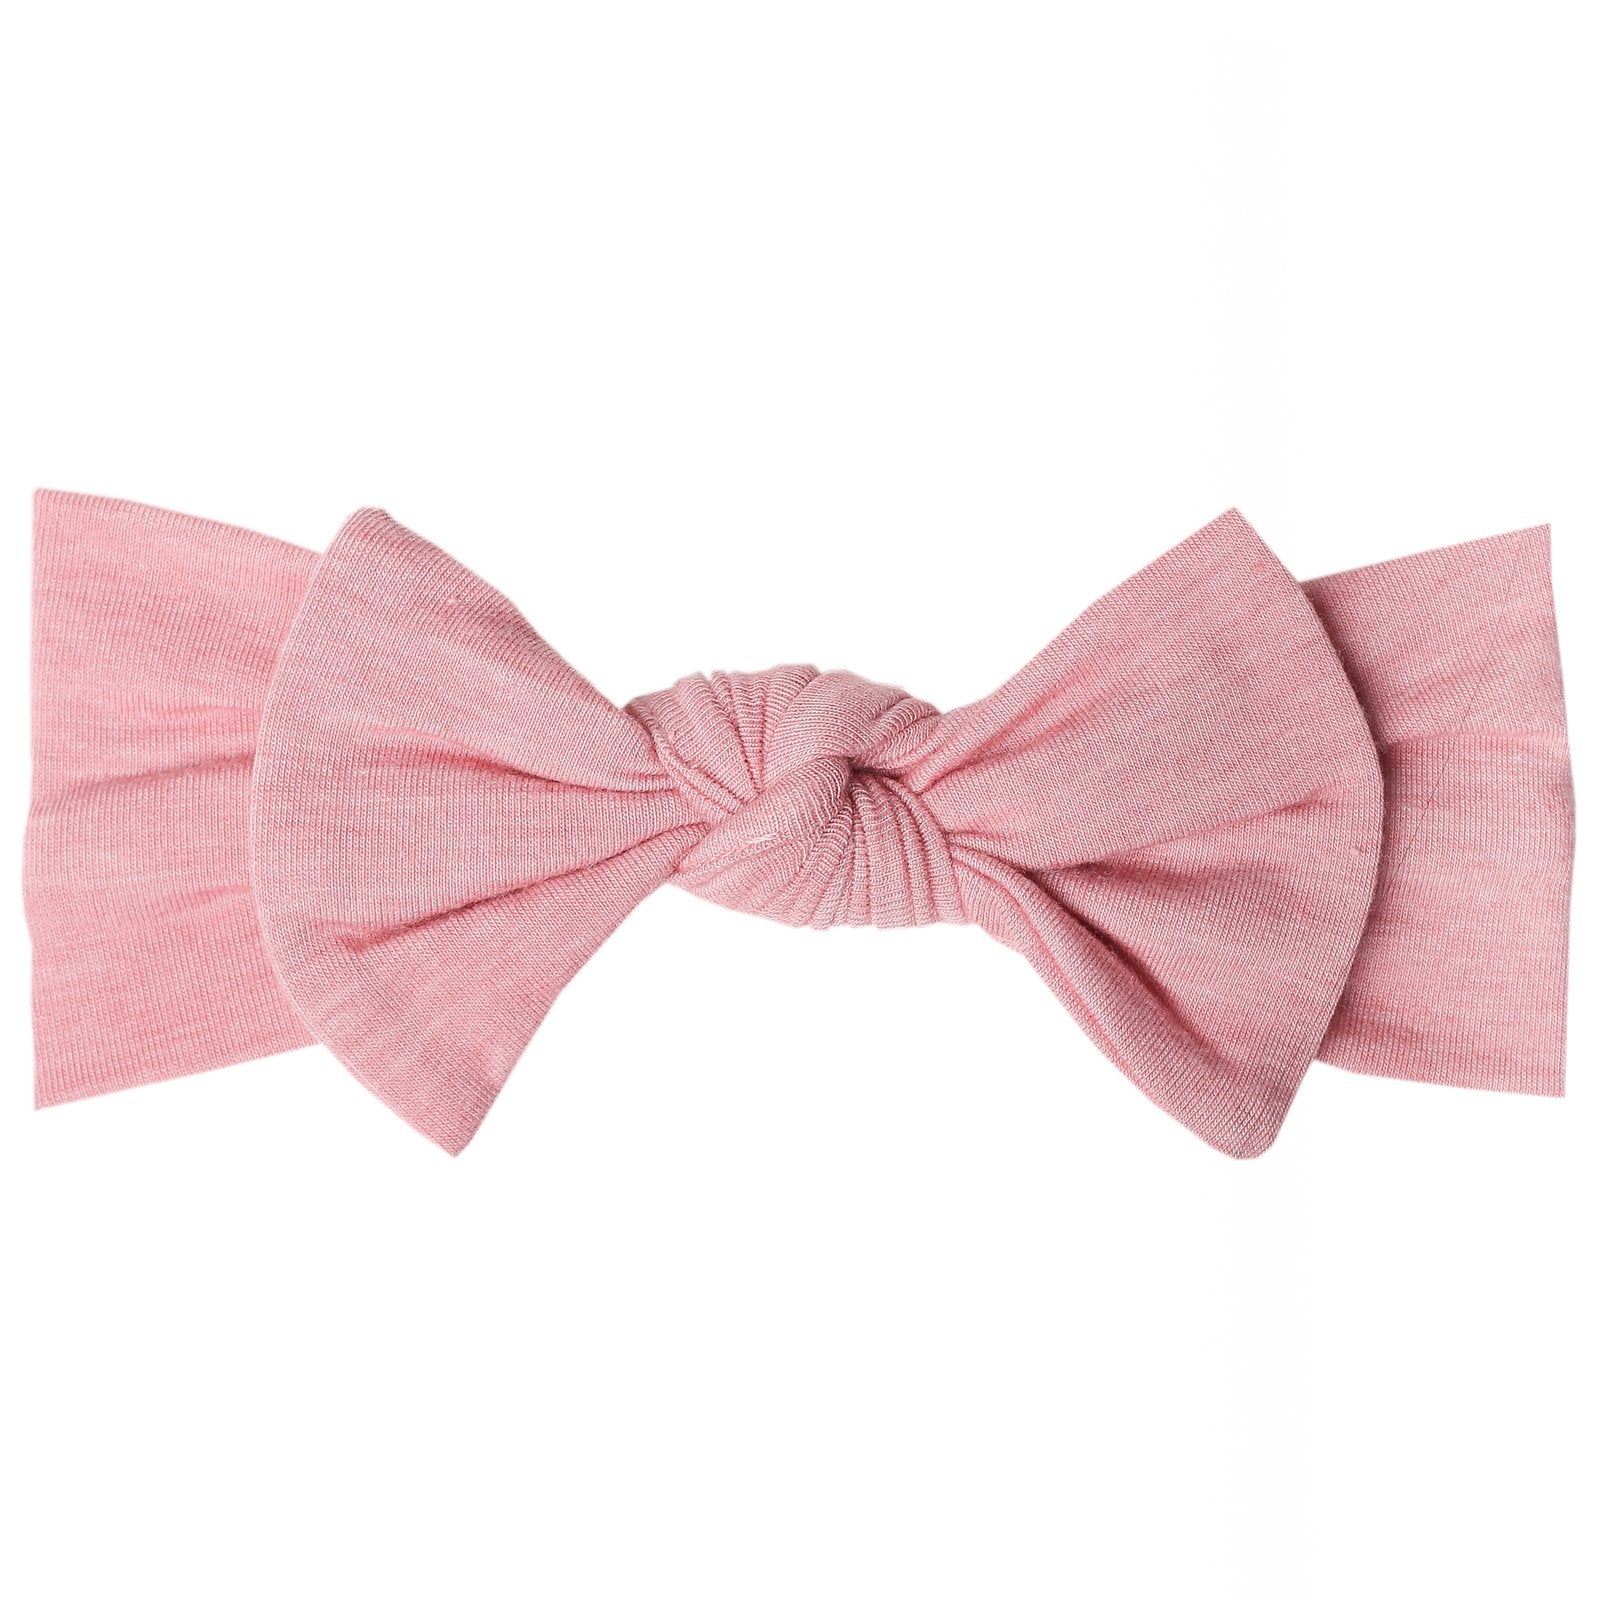 Darling Baby Bow